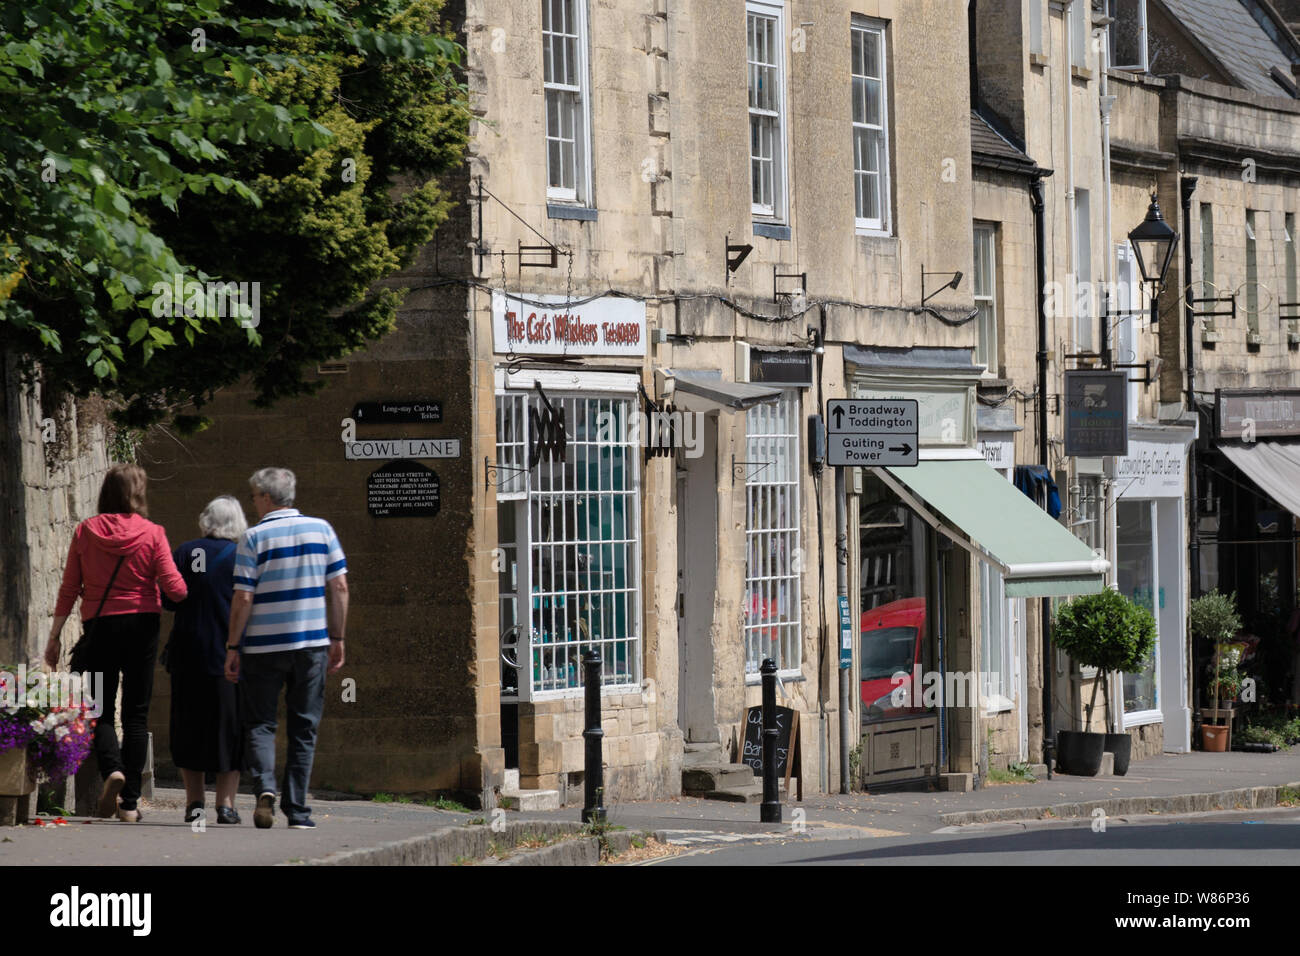 Shoppers / visitors, shops and local businesses. Street scene, Winchcombe, the Cotswolds, Gloucestershire Stock Photo